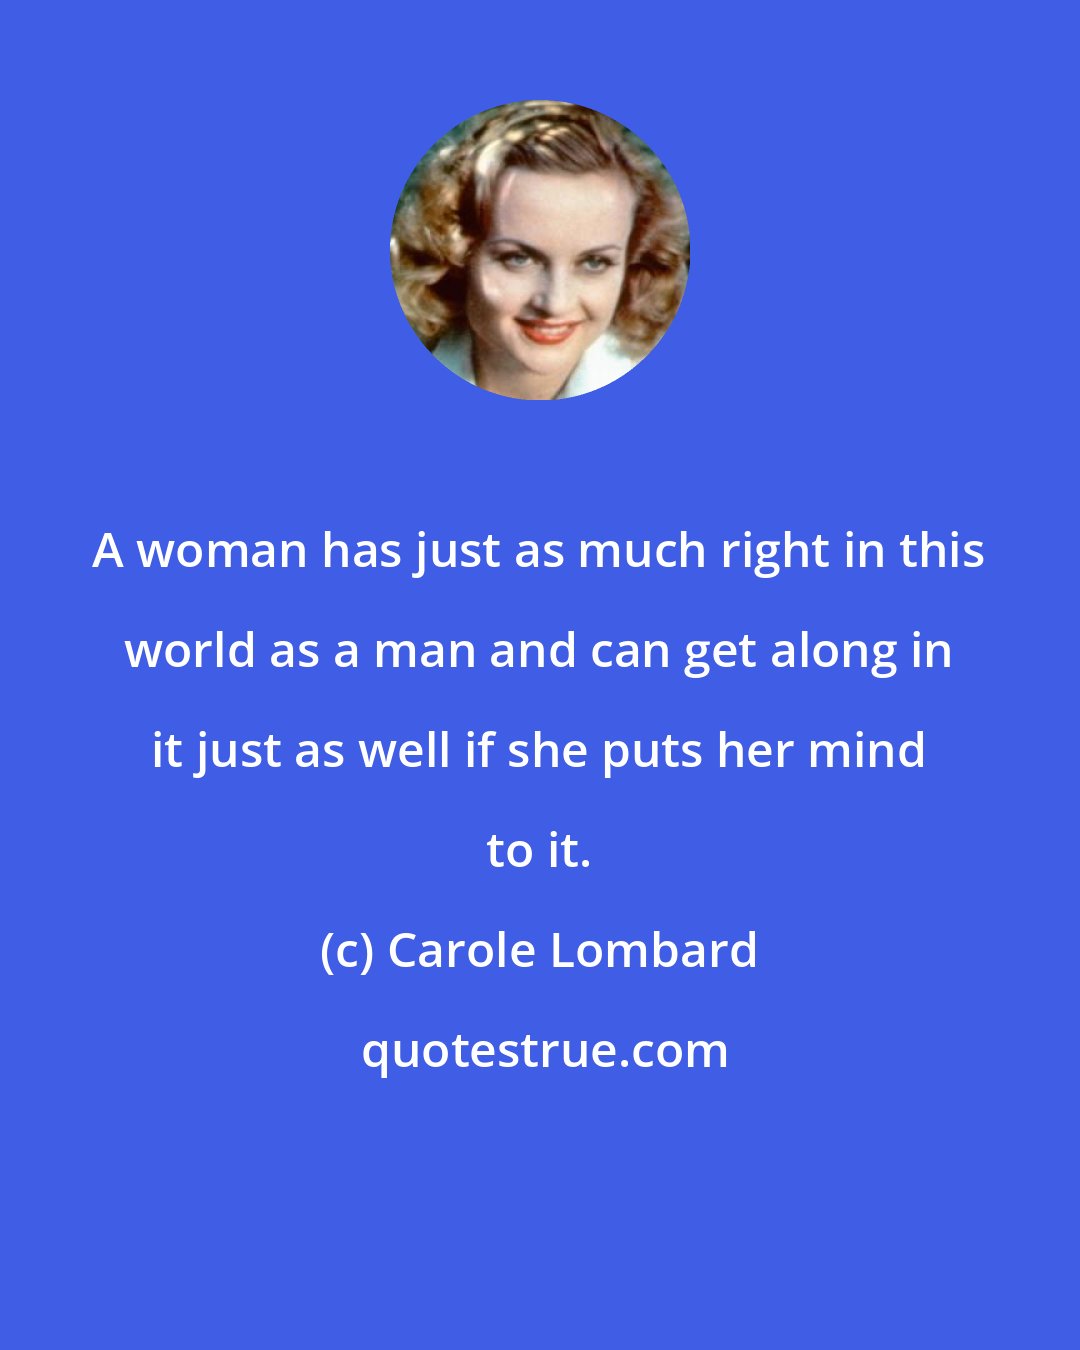 Carole Lombard: A woman has just as much right in this world as a man and can get along in it just as well if she puts her mind to it.